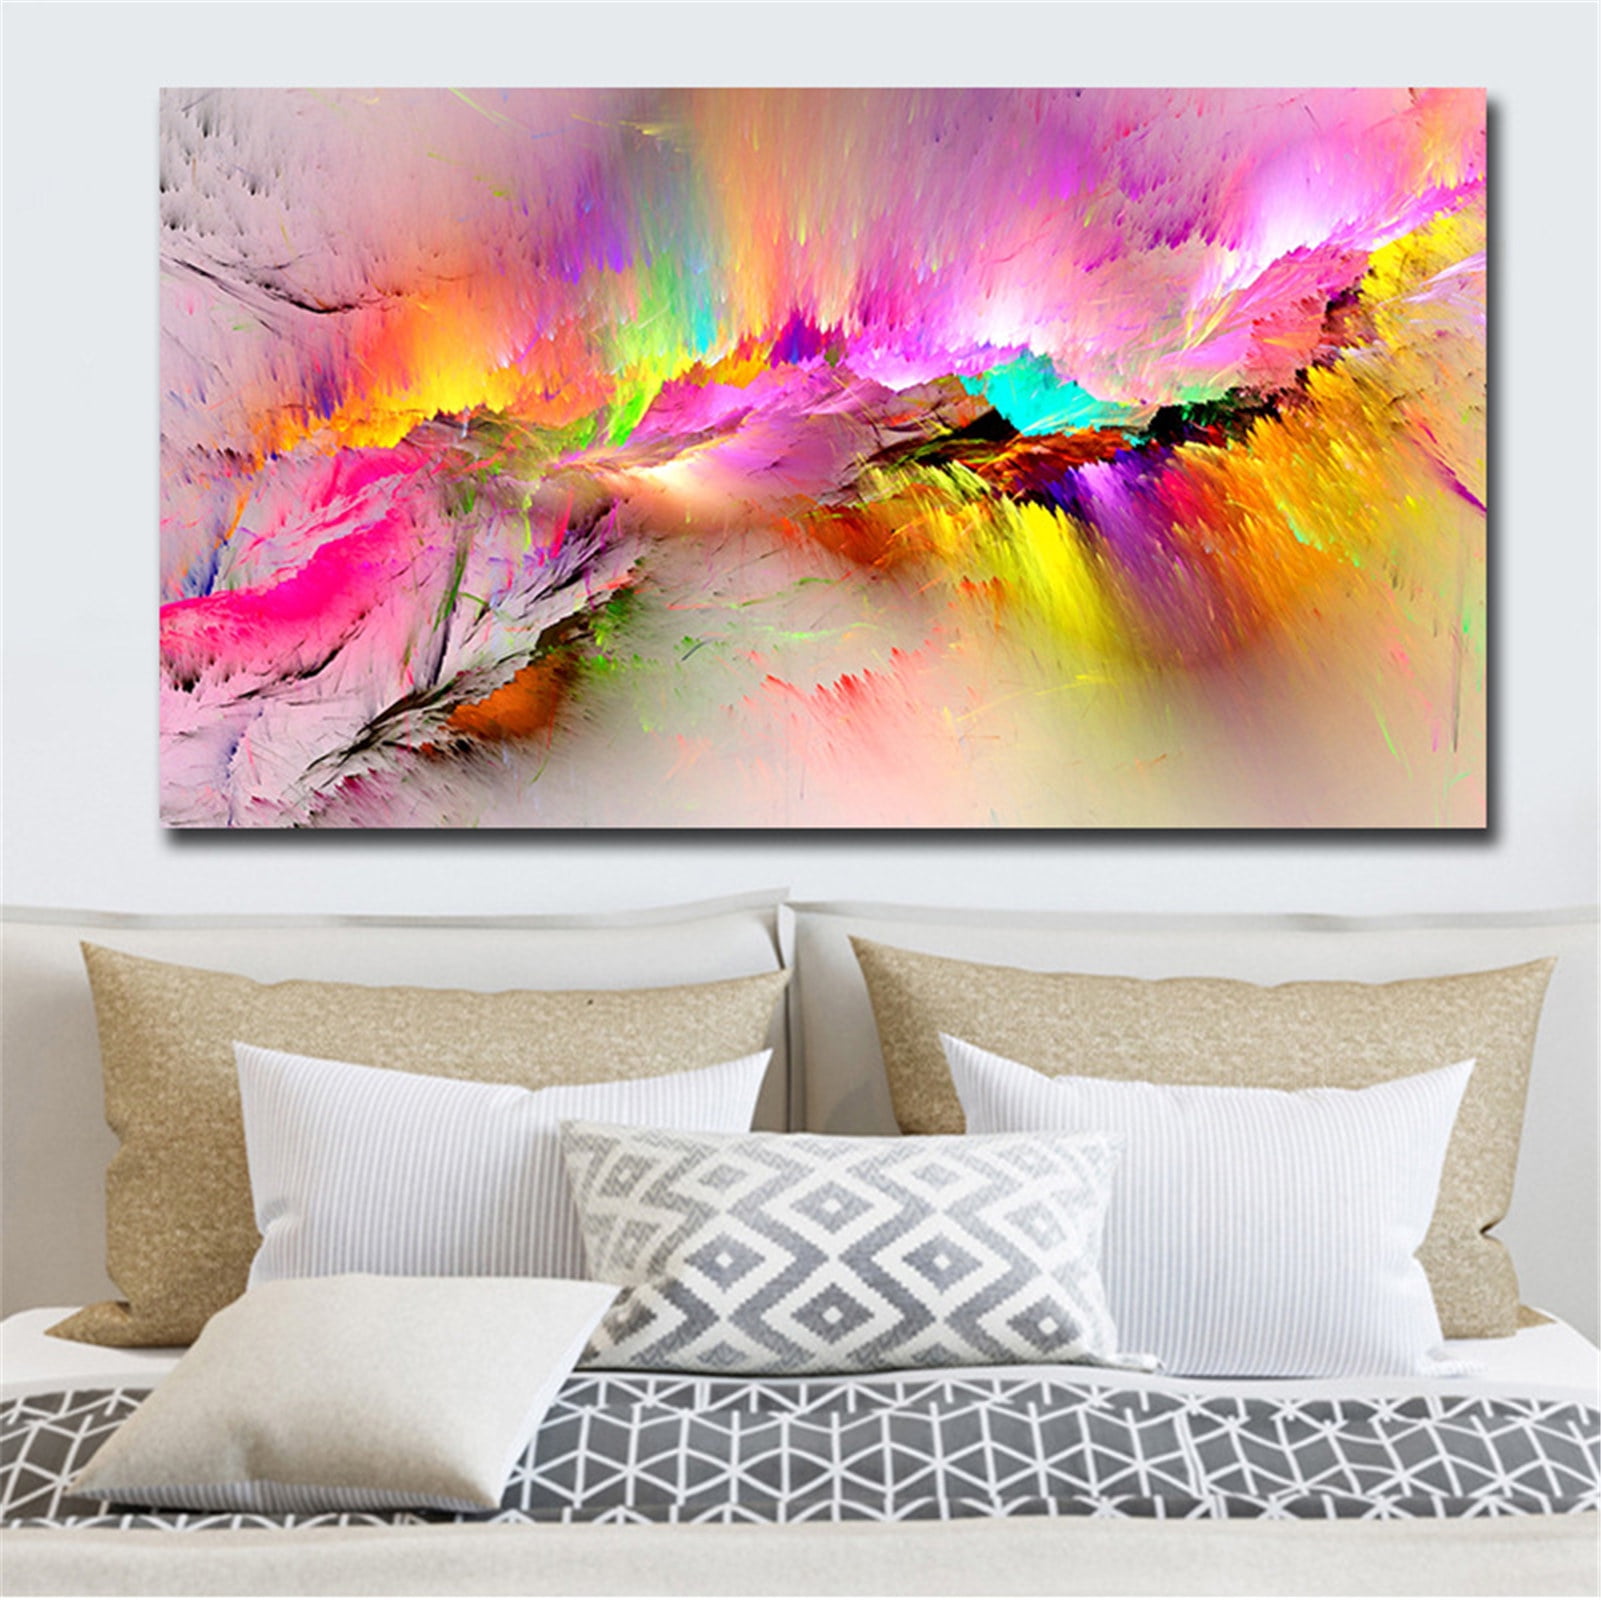 Modern Art Canvas Painting Colorful Clouds Abstract Big Size Canvas Art  Prints Poster for Living Room Home Decor 80x160cm-(31.5x62.9in)Framed-015